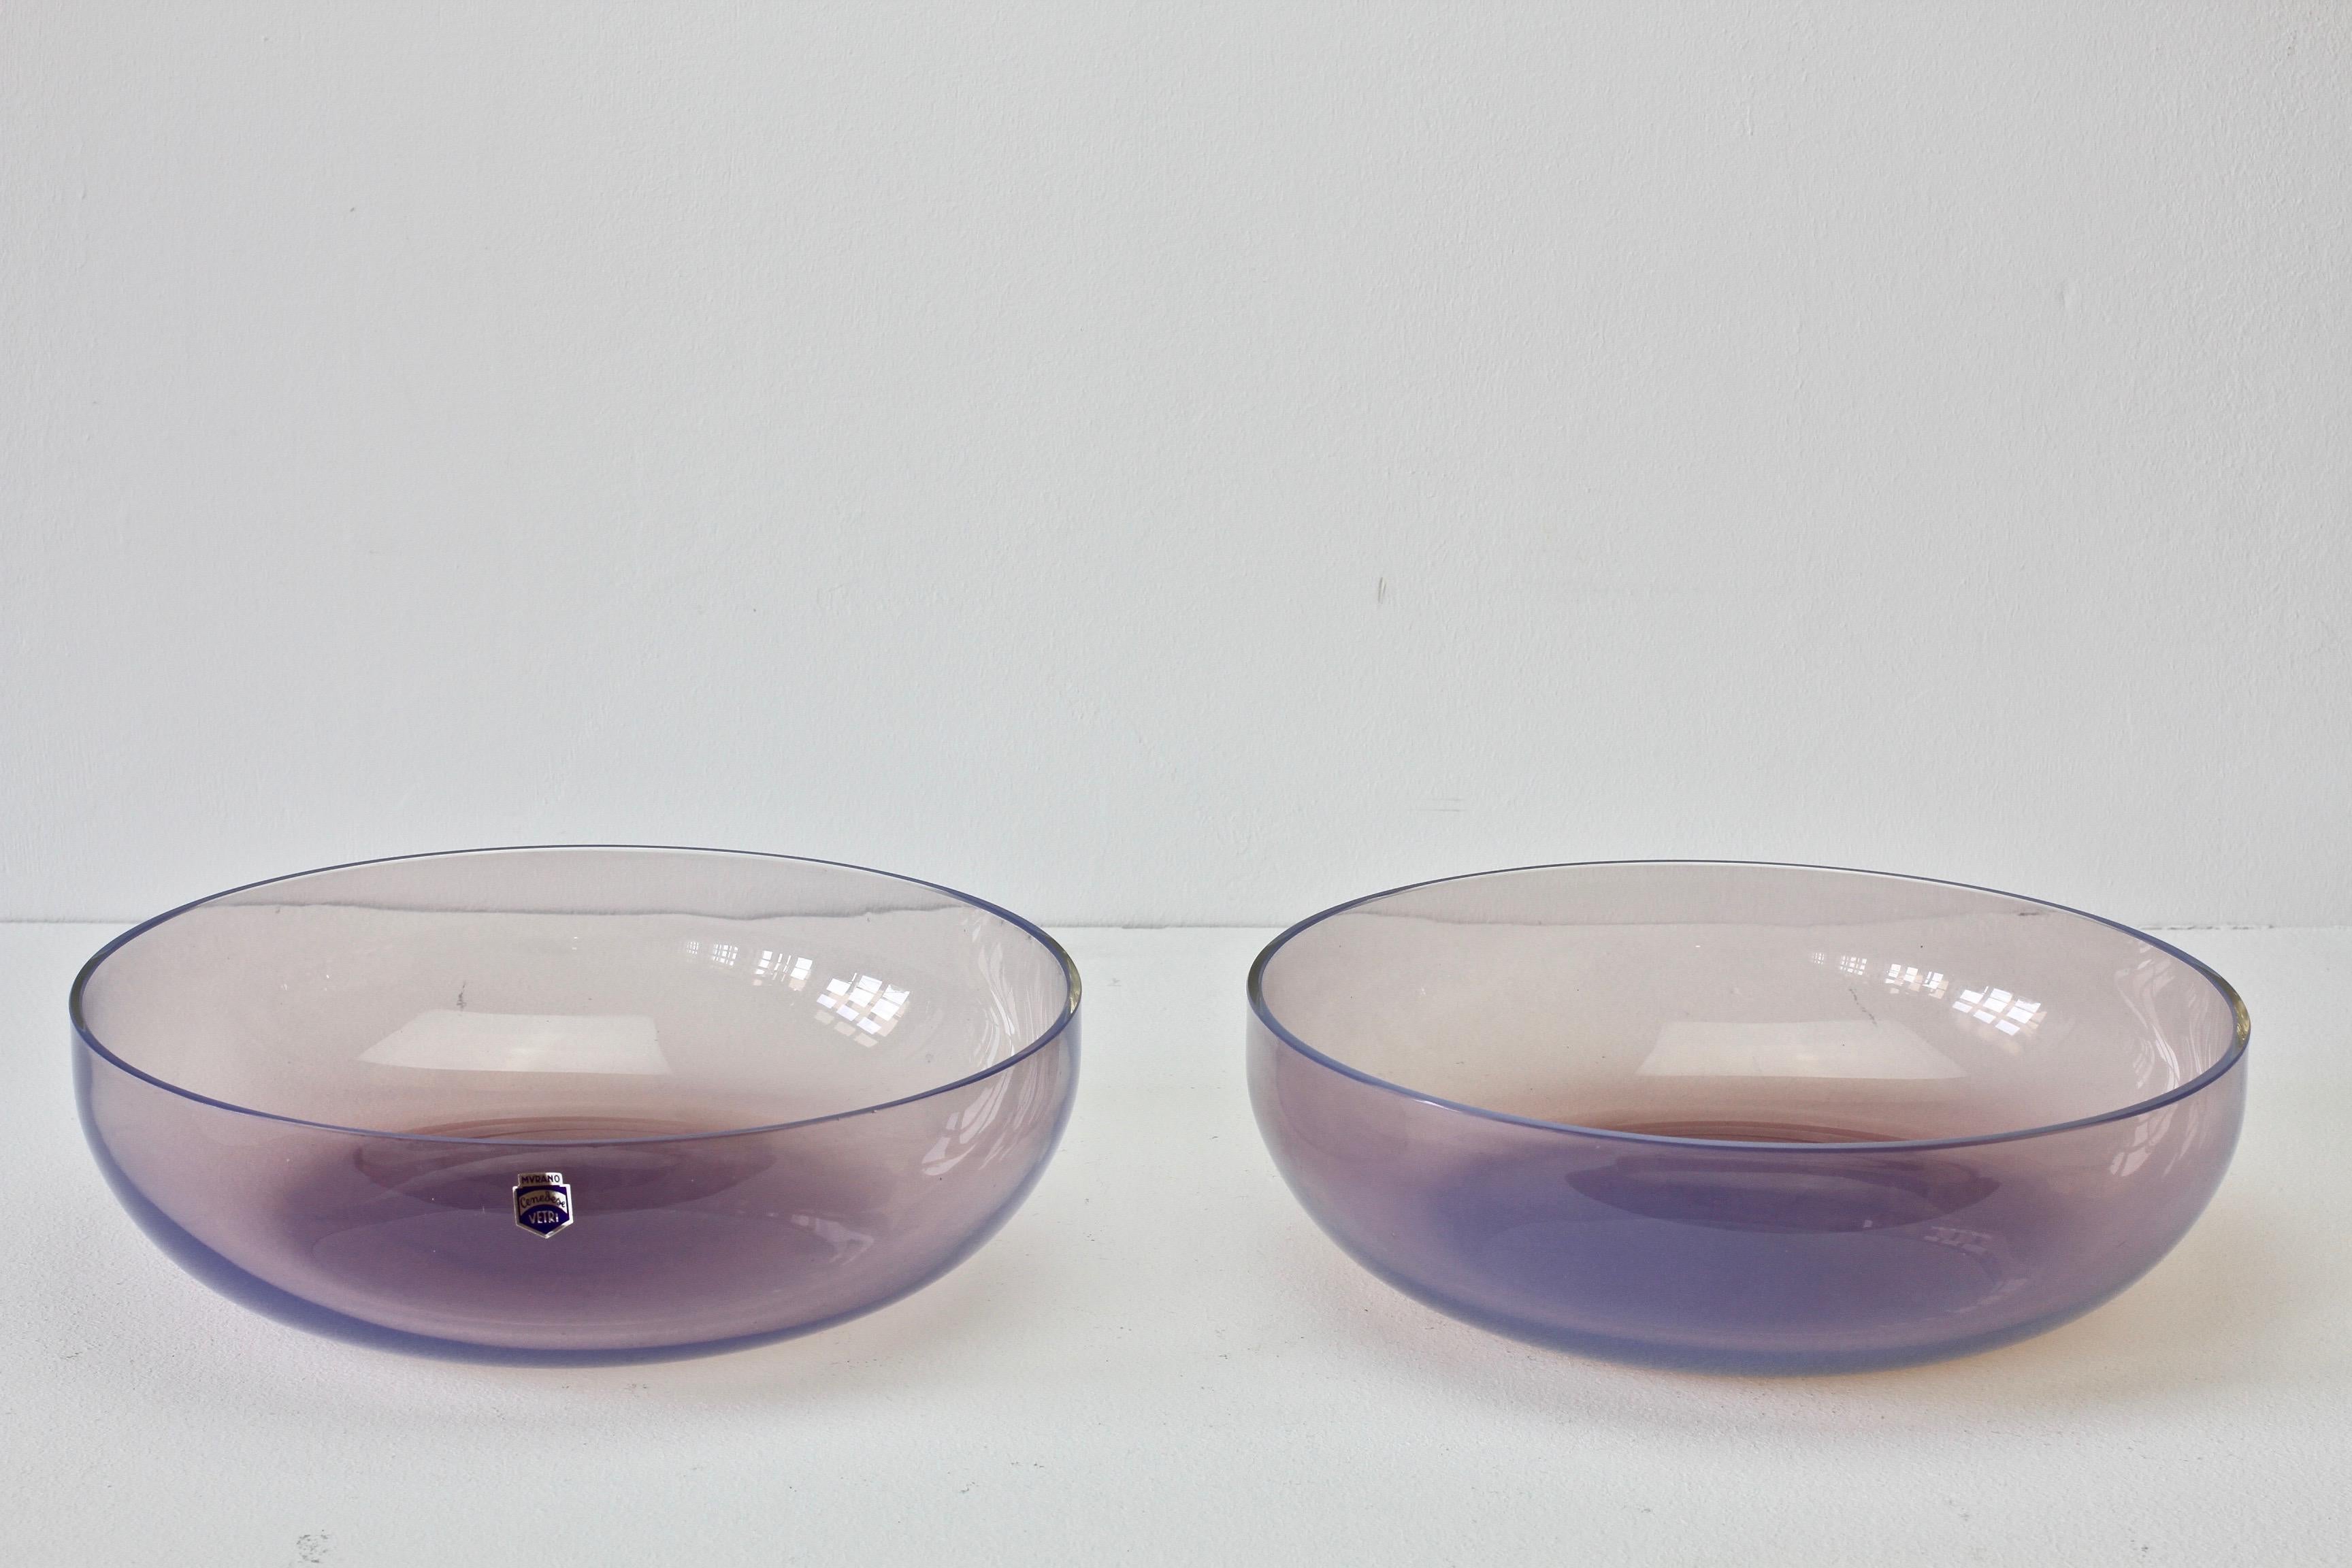 Large pair of pink / aubergine colored 'Opalino' Murano glass serving / center bowls designed by Antonio da Ros (1936-2012) for Cenedese, circa 1970-1990. Wonderful translucent color of pink or aubergine, almost pink sapphire to purple amethyst.